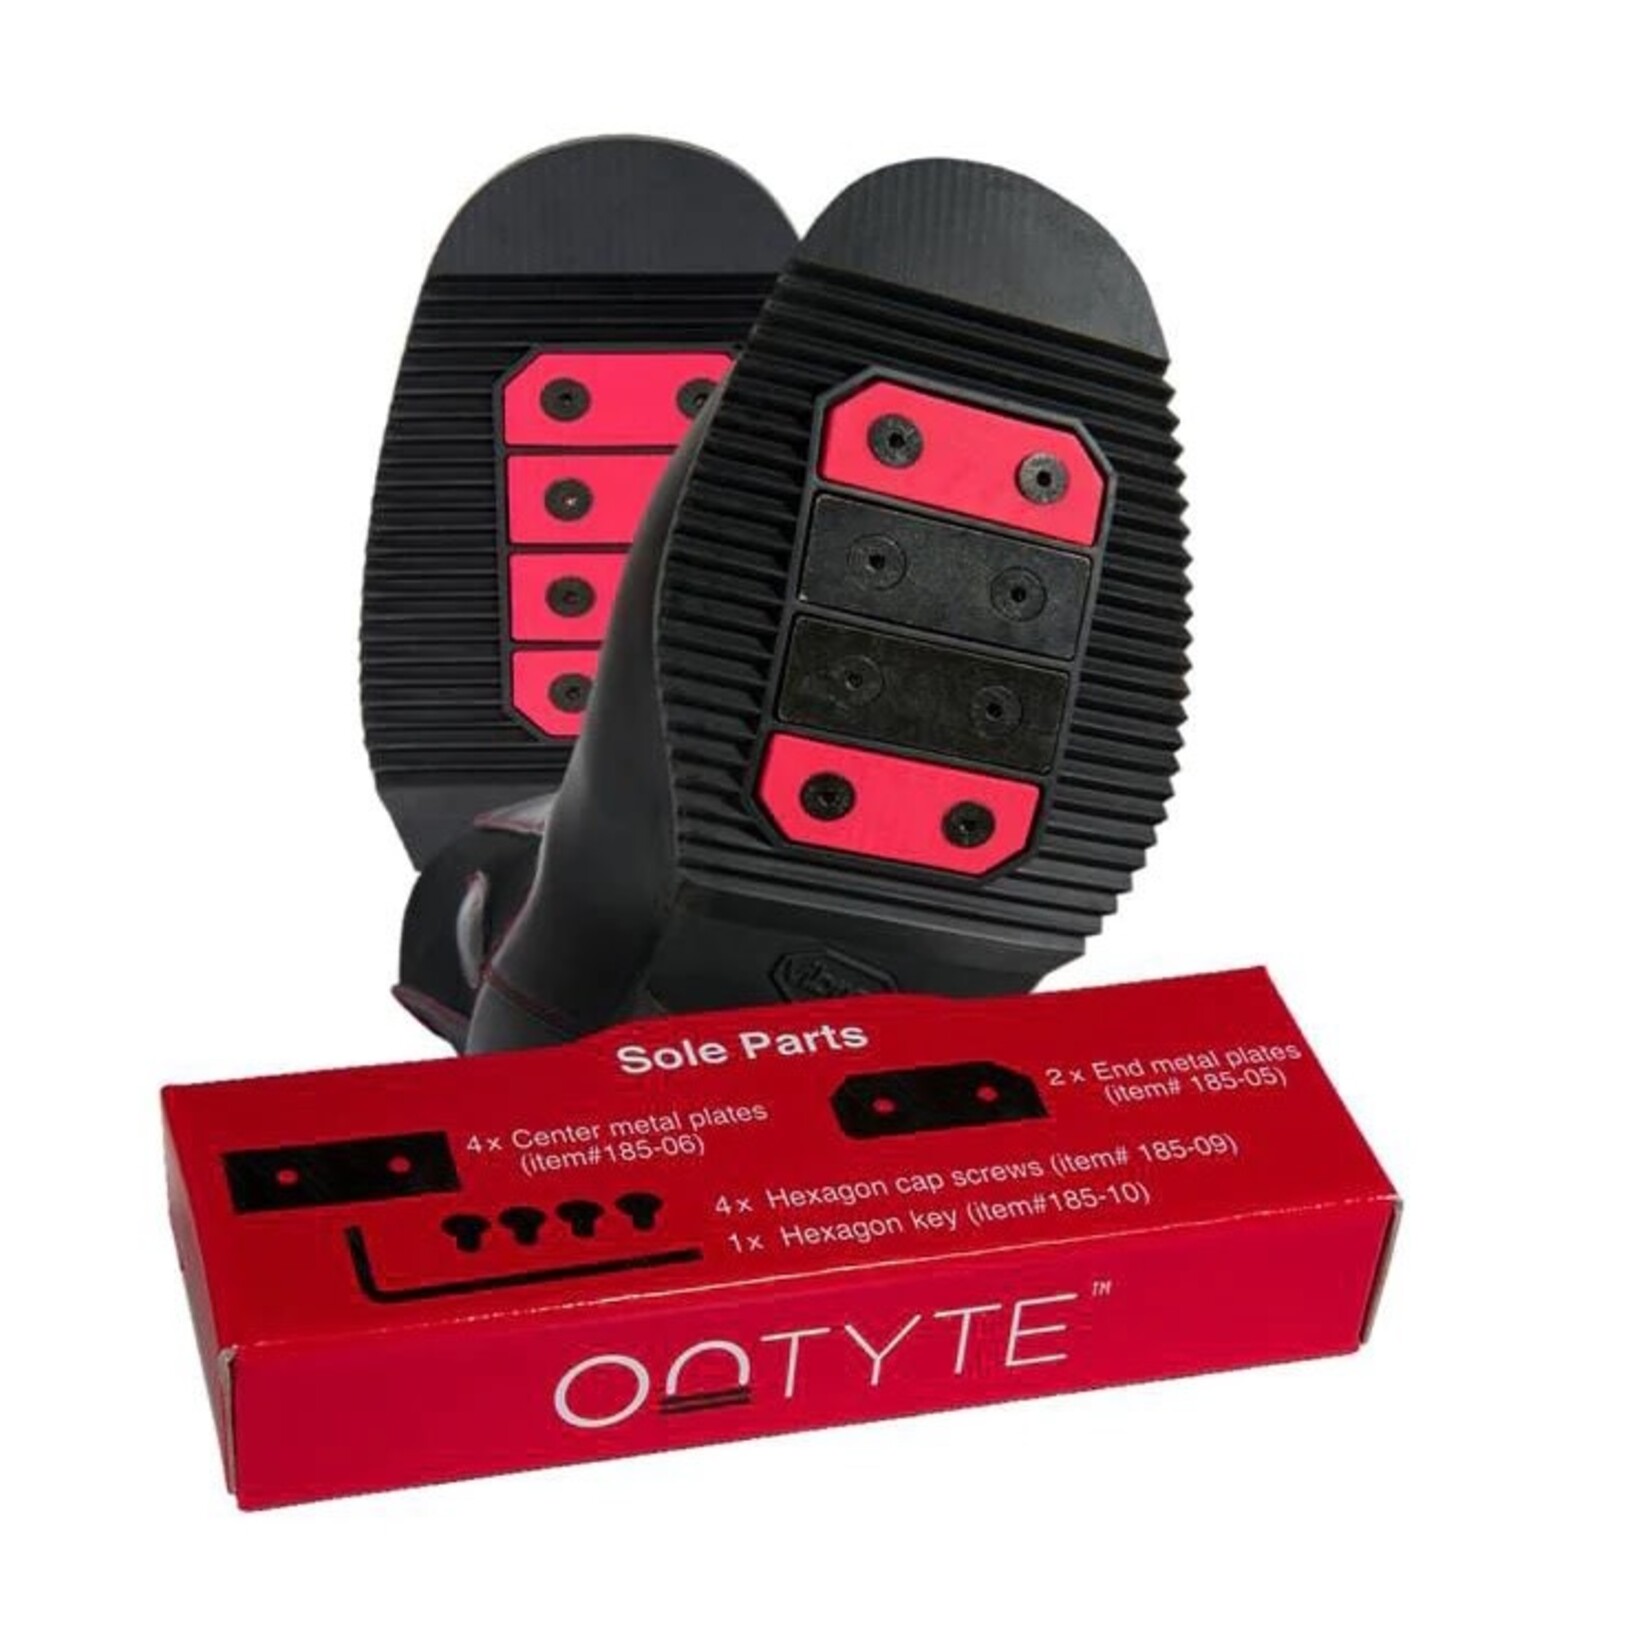 OnTyte Precision Placement Resole Kit